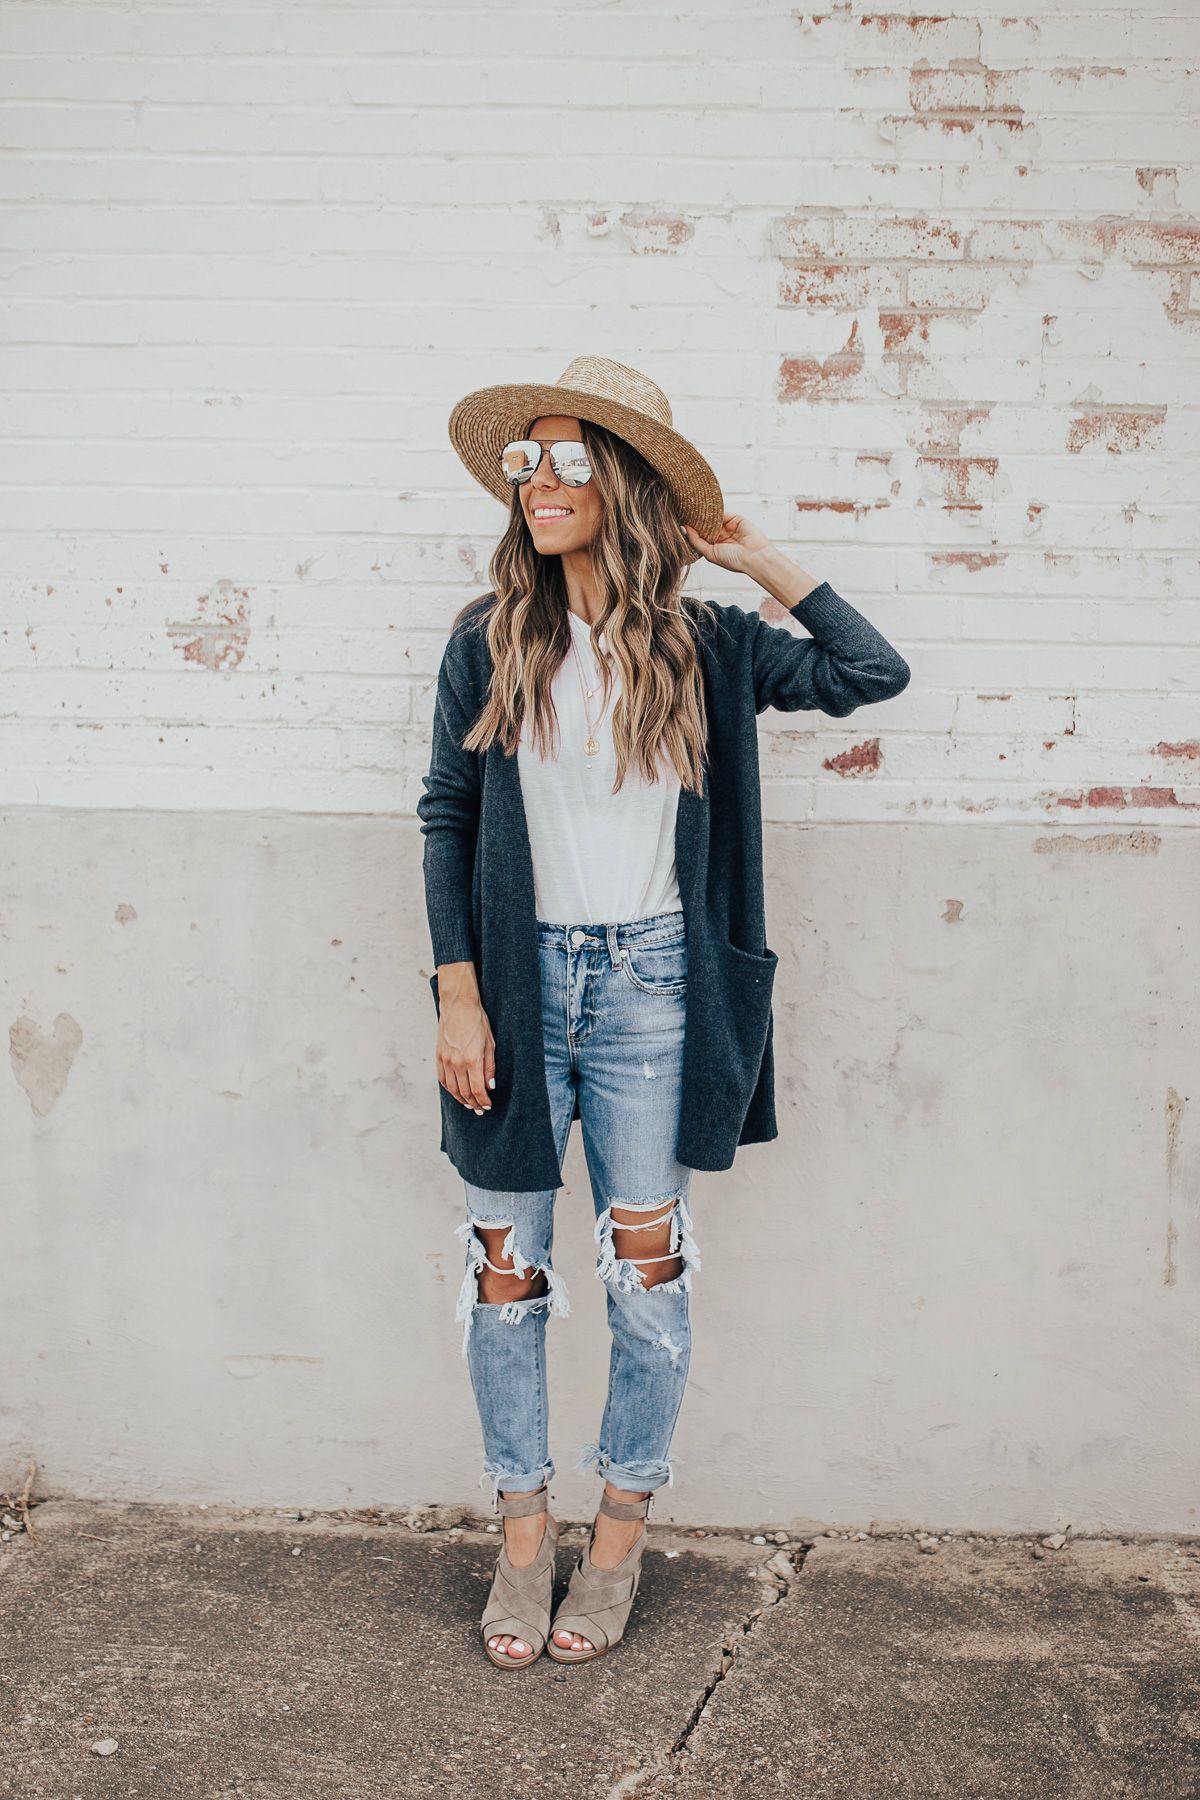 3 Cardigans to Wear With Jeans and a Tee - 3 Cardigans to Wear With Jeans and a Tee -   17 style Casual boho ideas